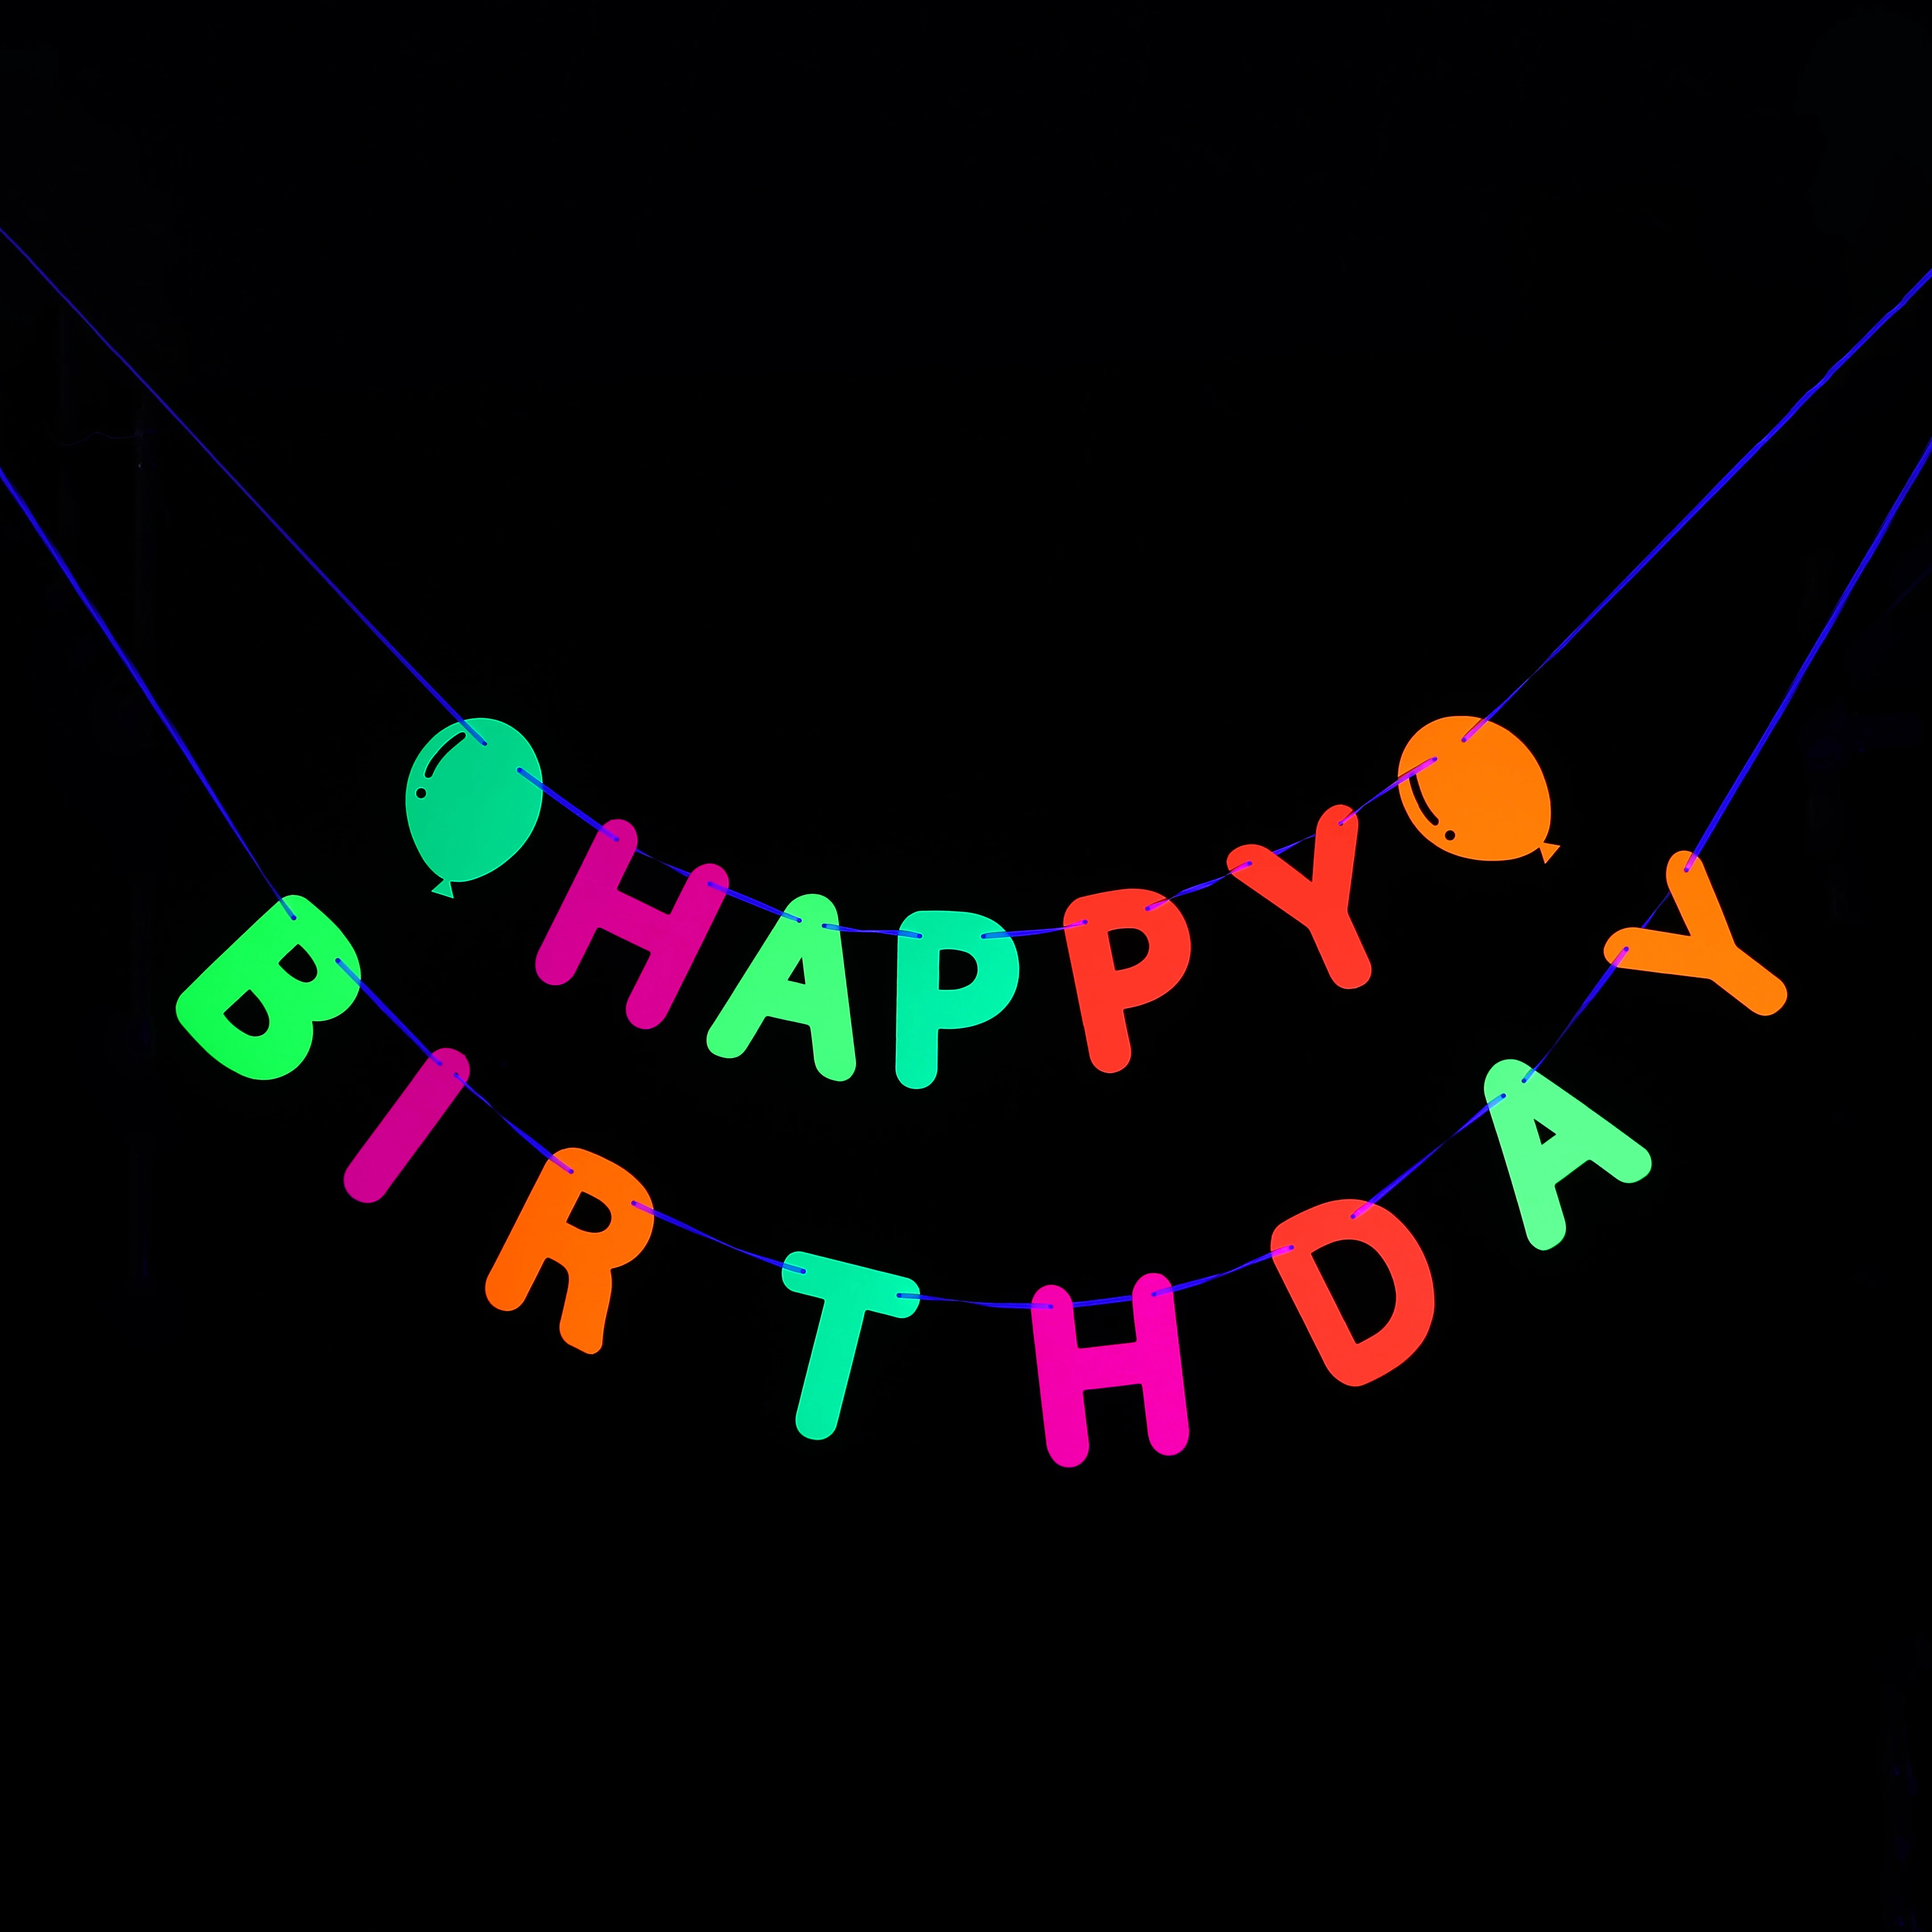 

Happy Birthday Banner UV Black Light Reactive Streamers Paper Garland Glow Neon Party Supplies for 80s 90s Themed Birthday Party